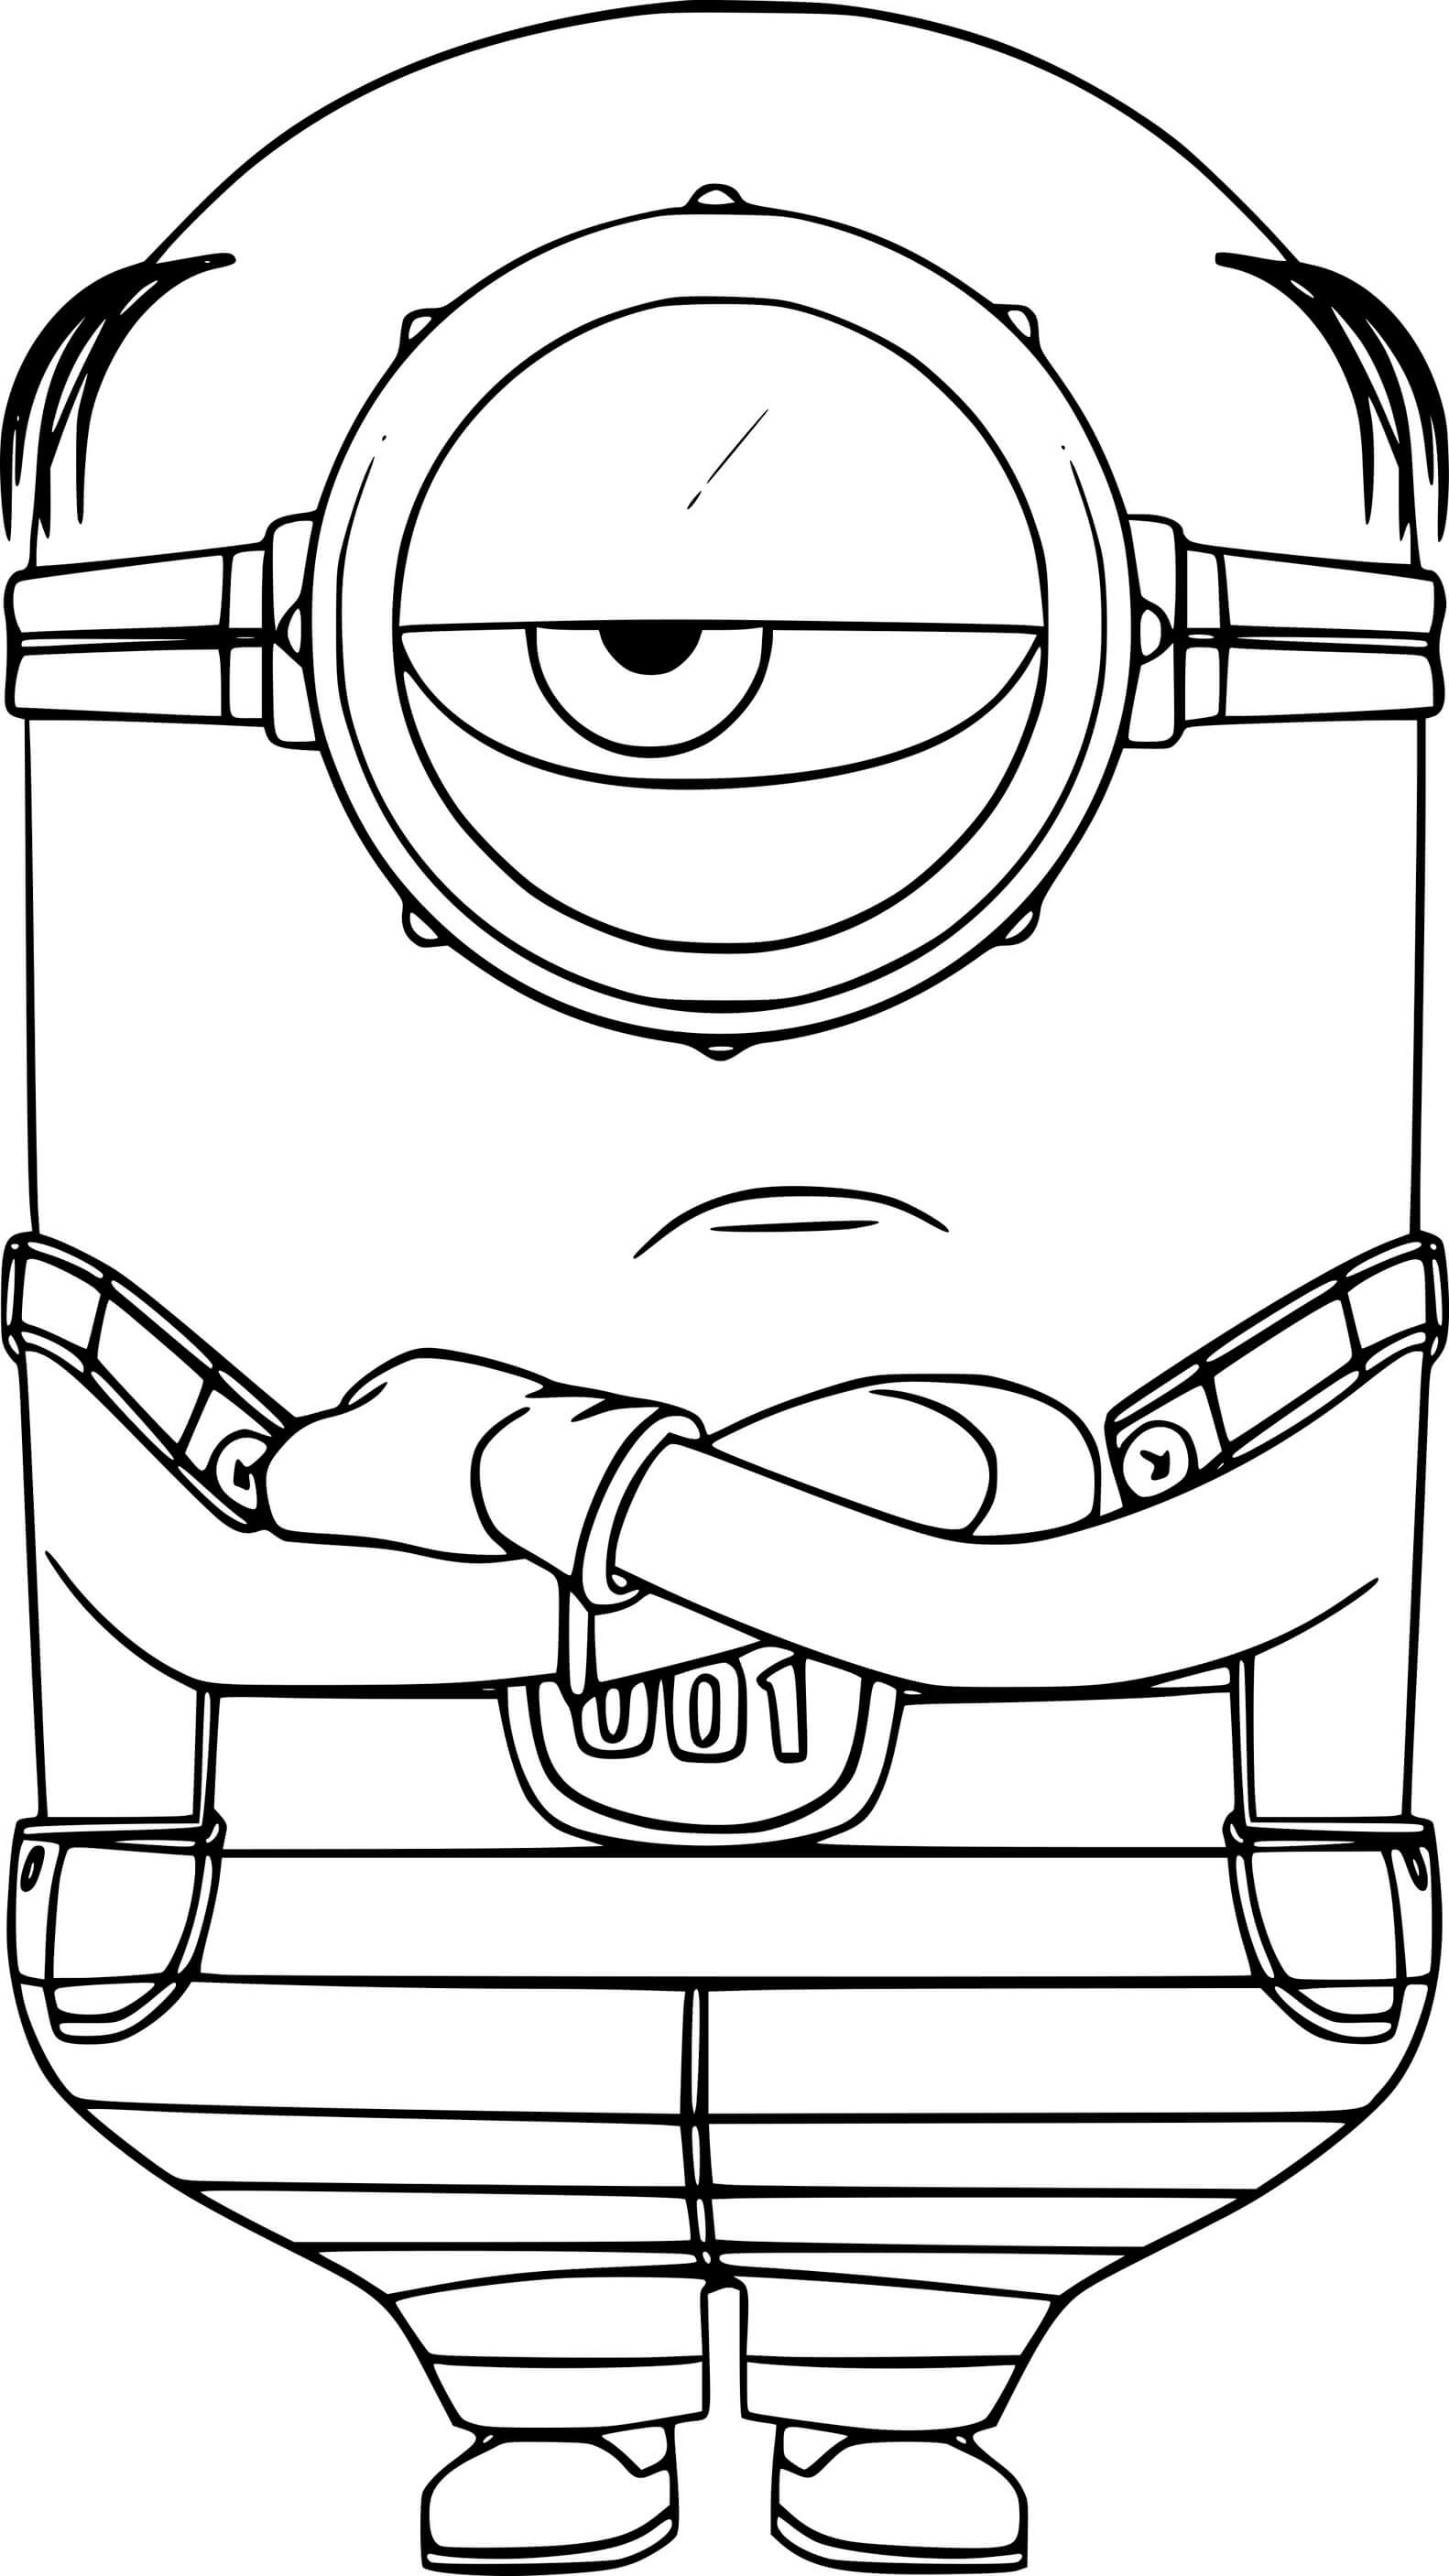 Number One Minion Is Angry Coloring Page